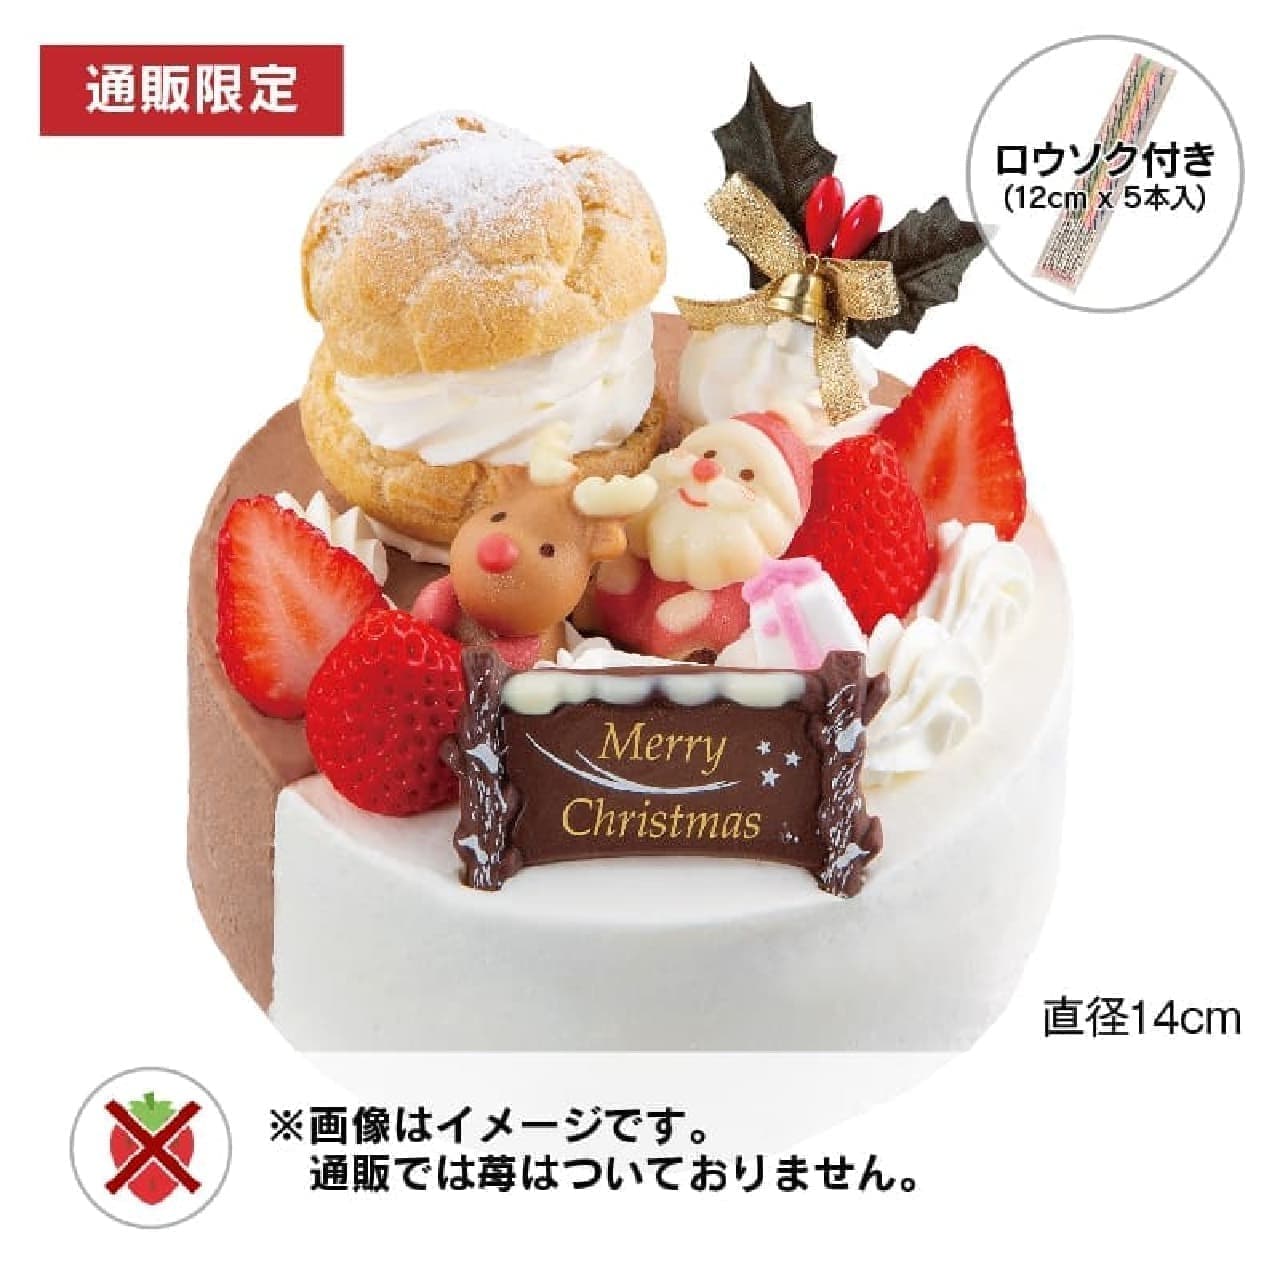 Chateraise "[Mail Order] Xmas 2-flavor Decoration 14cm (without Strawberry)